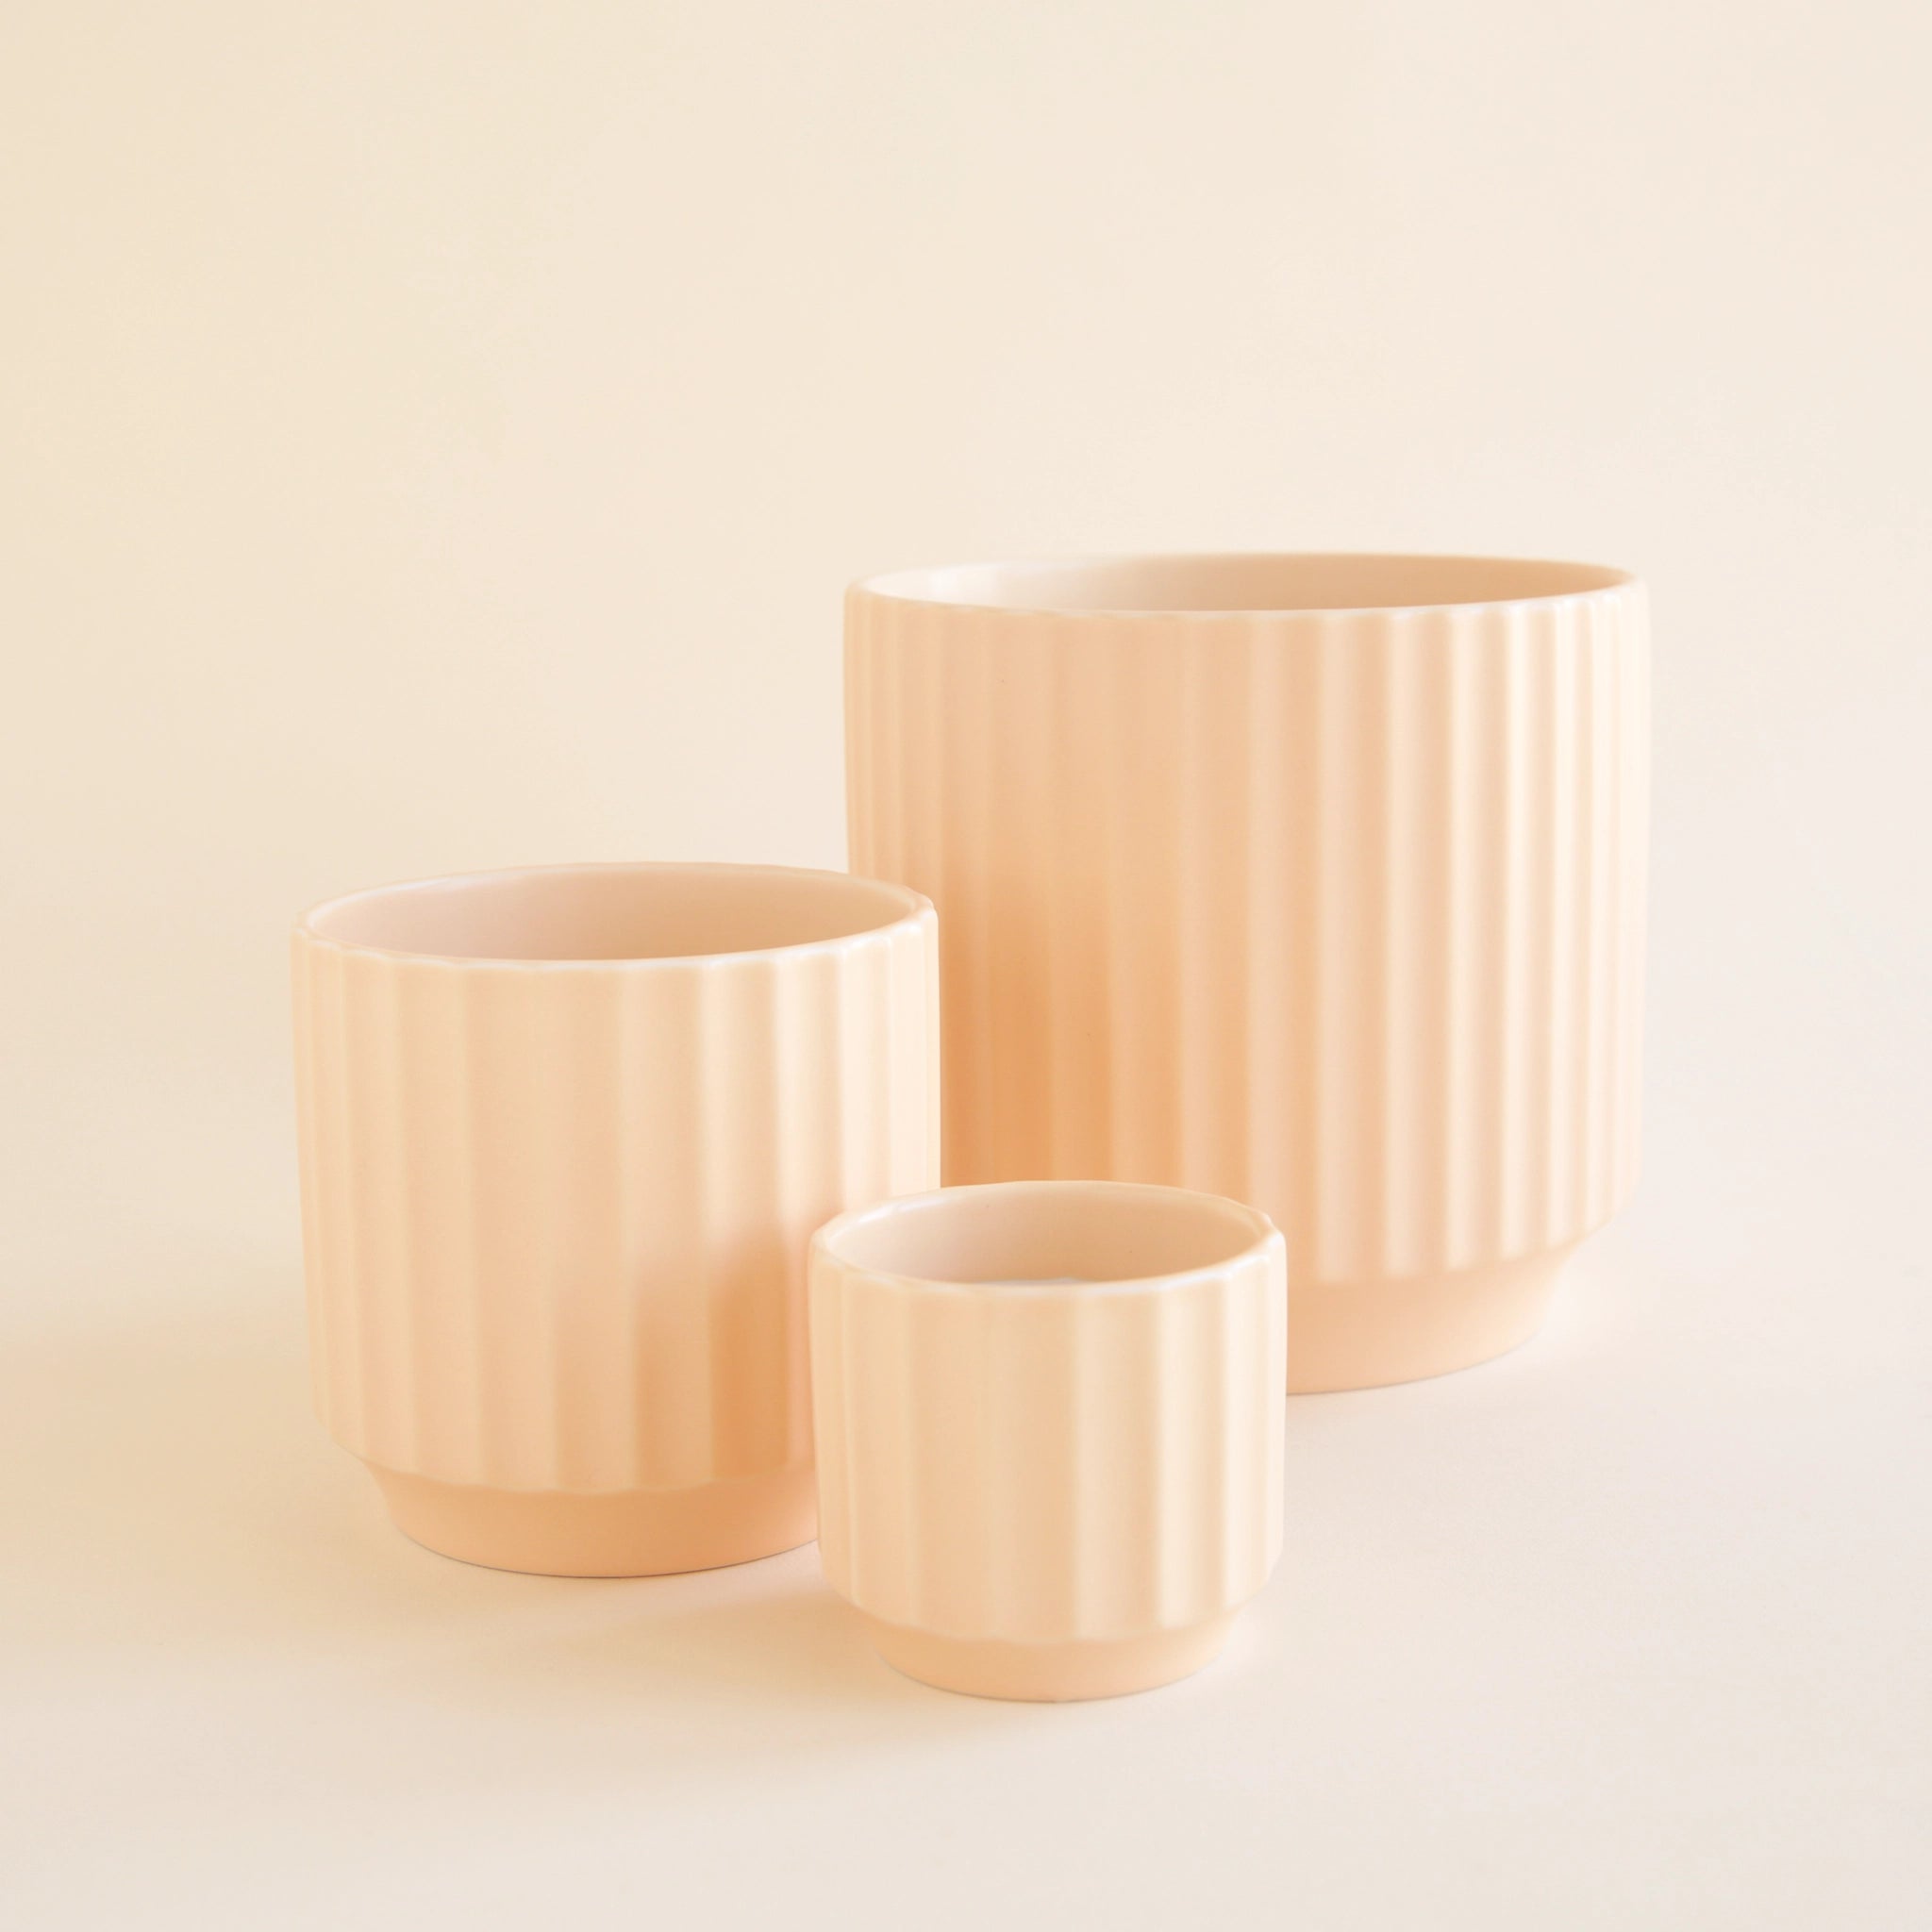 On a white background is three different sized ceramic pots with a fluted texture in a light pink shade.